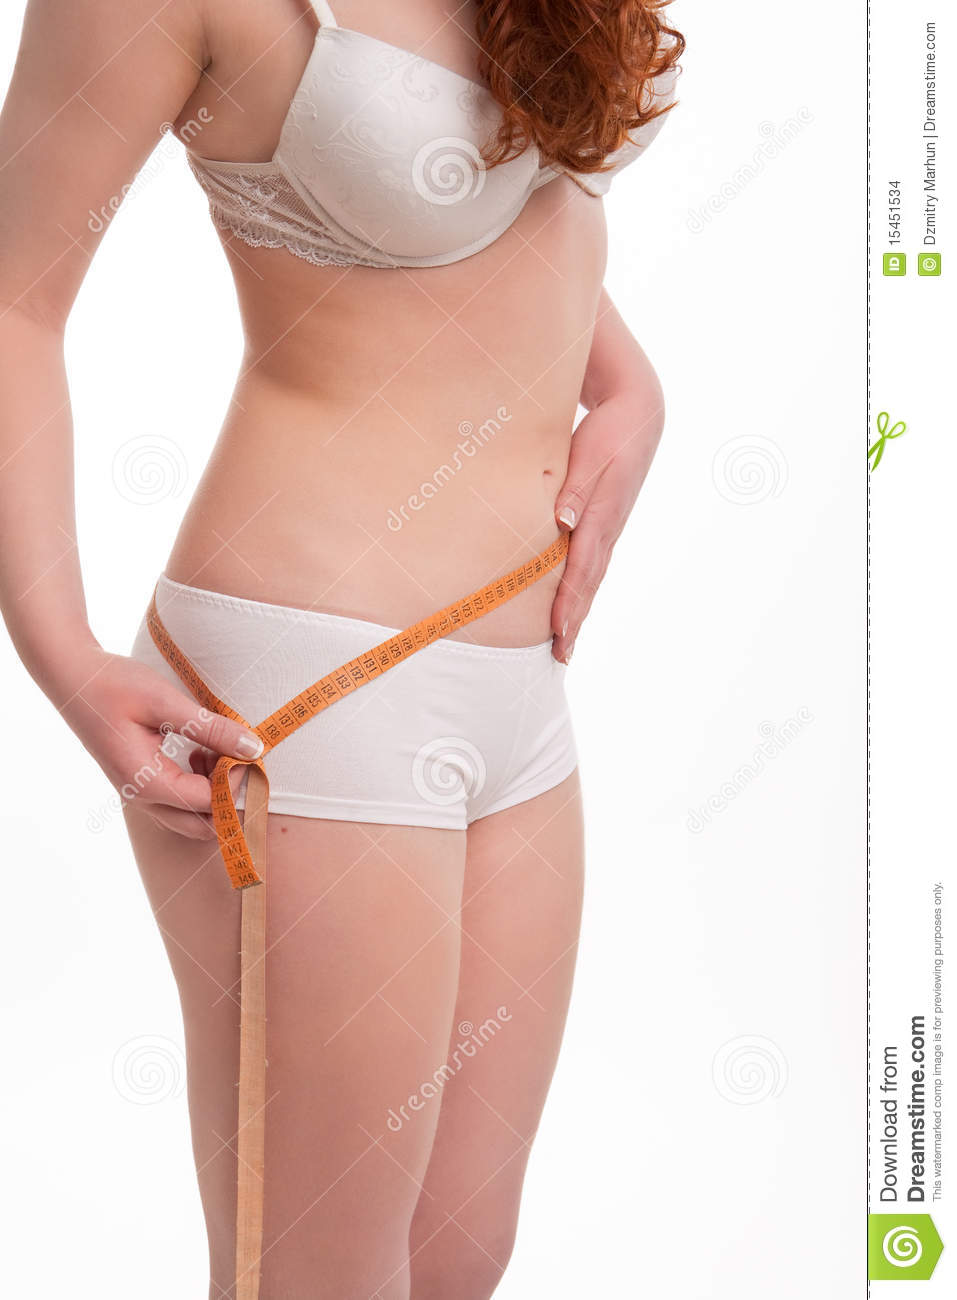 Body Measurement Stock Images   Image  15451534